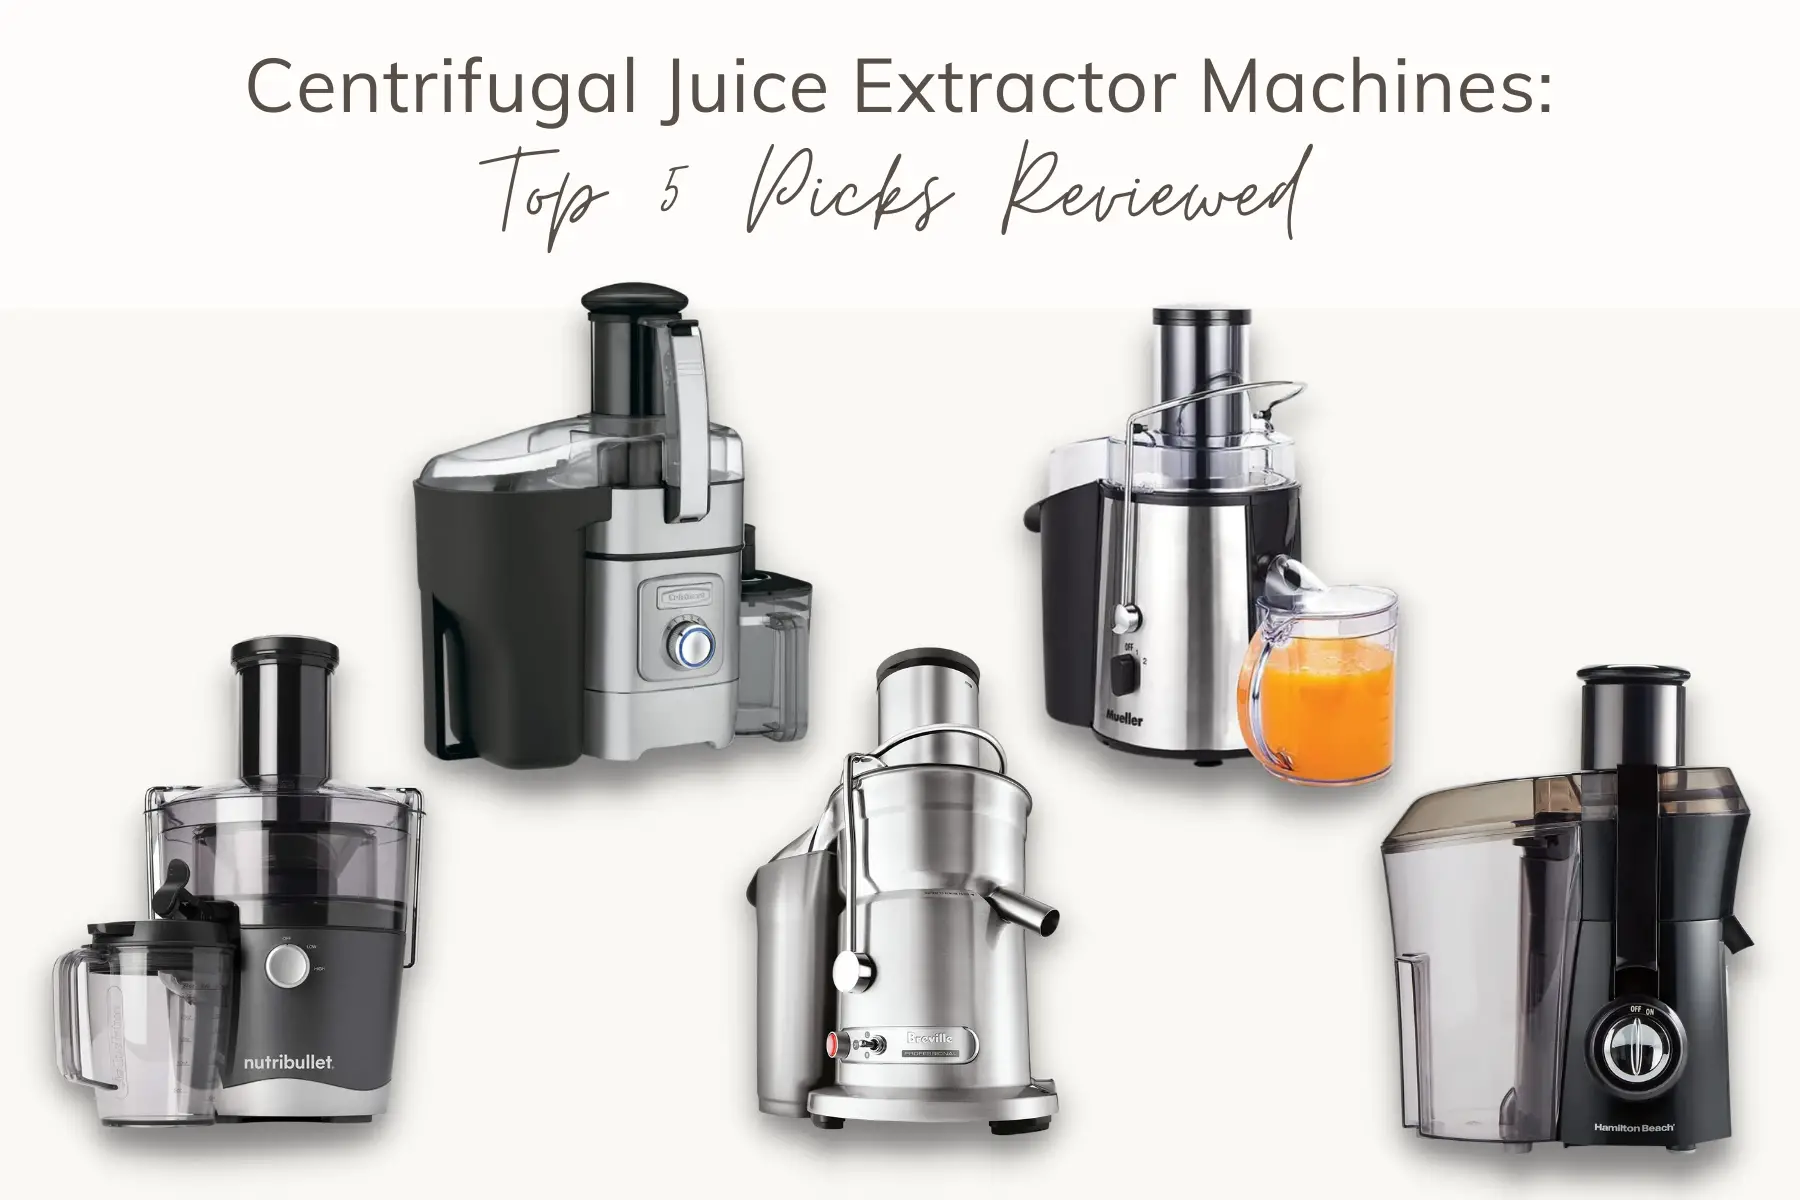 centrifugal juice extractor machines Top 5 Picks Reviewed